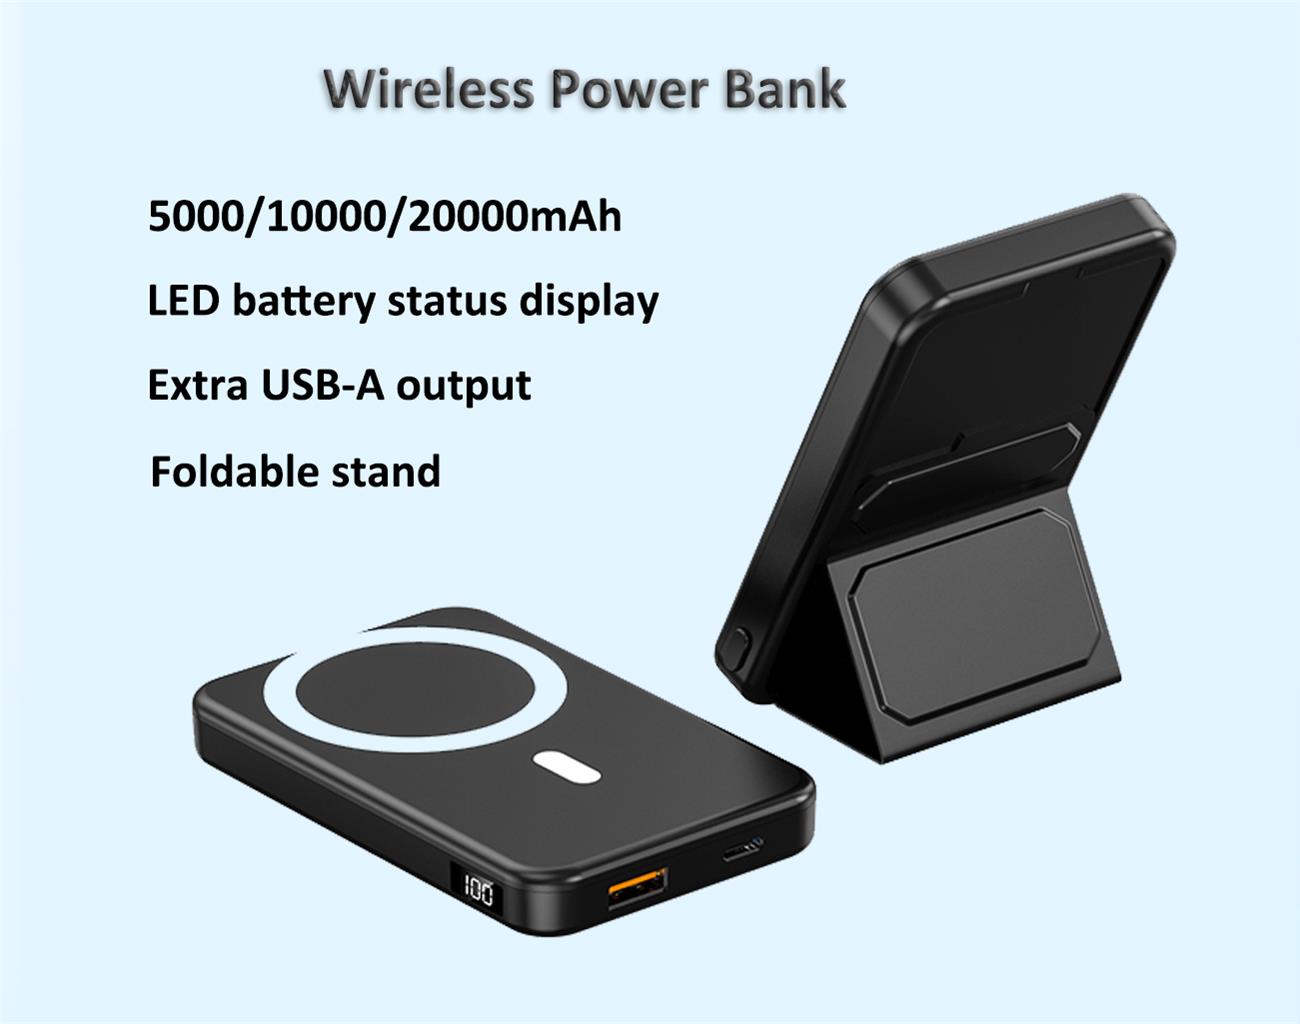 Magnetic Wireless Power Bank Foldable Stand 5000-10000-20000 mAh